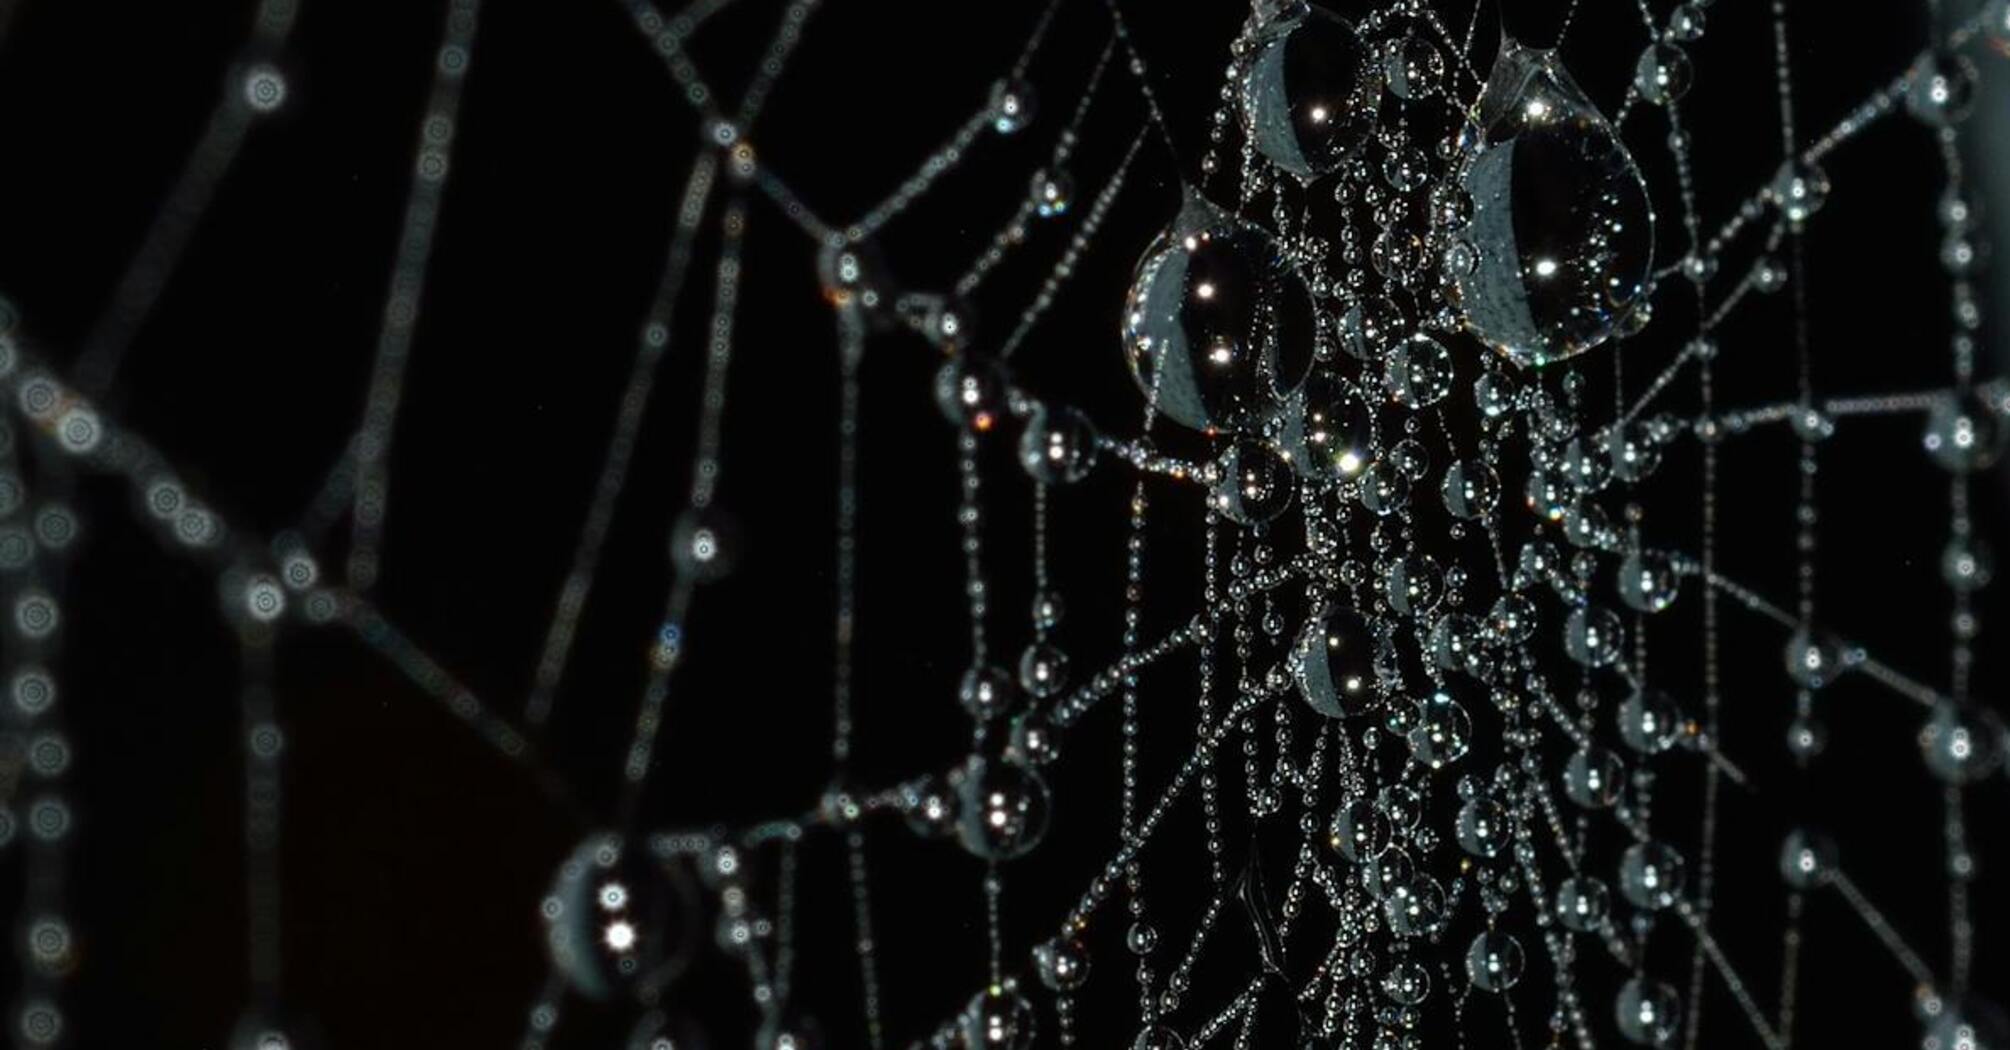 Not just catching prey: spiders have been found to play music on webs (listen, video)